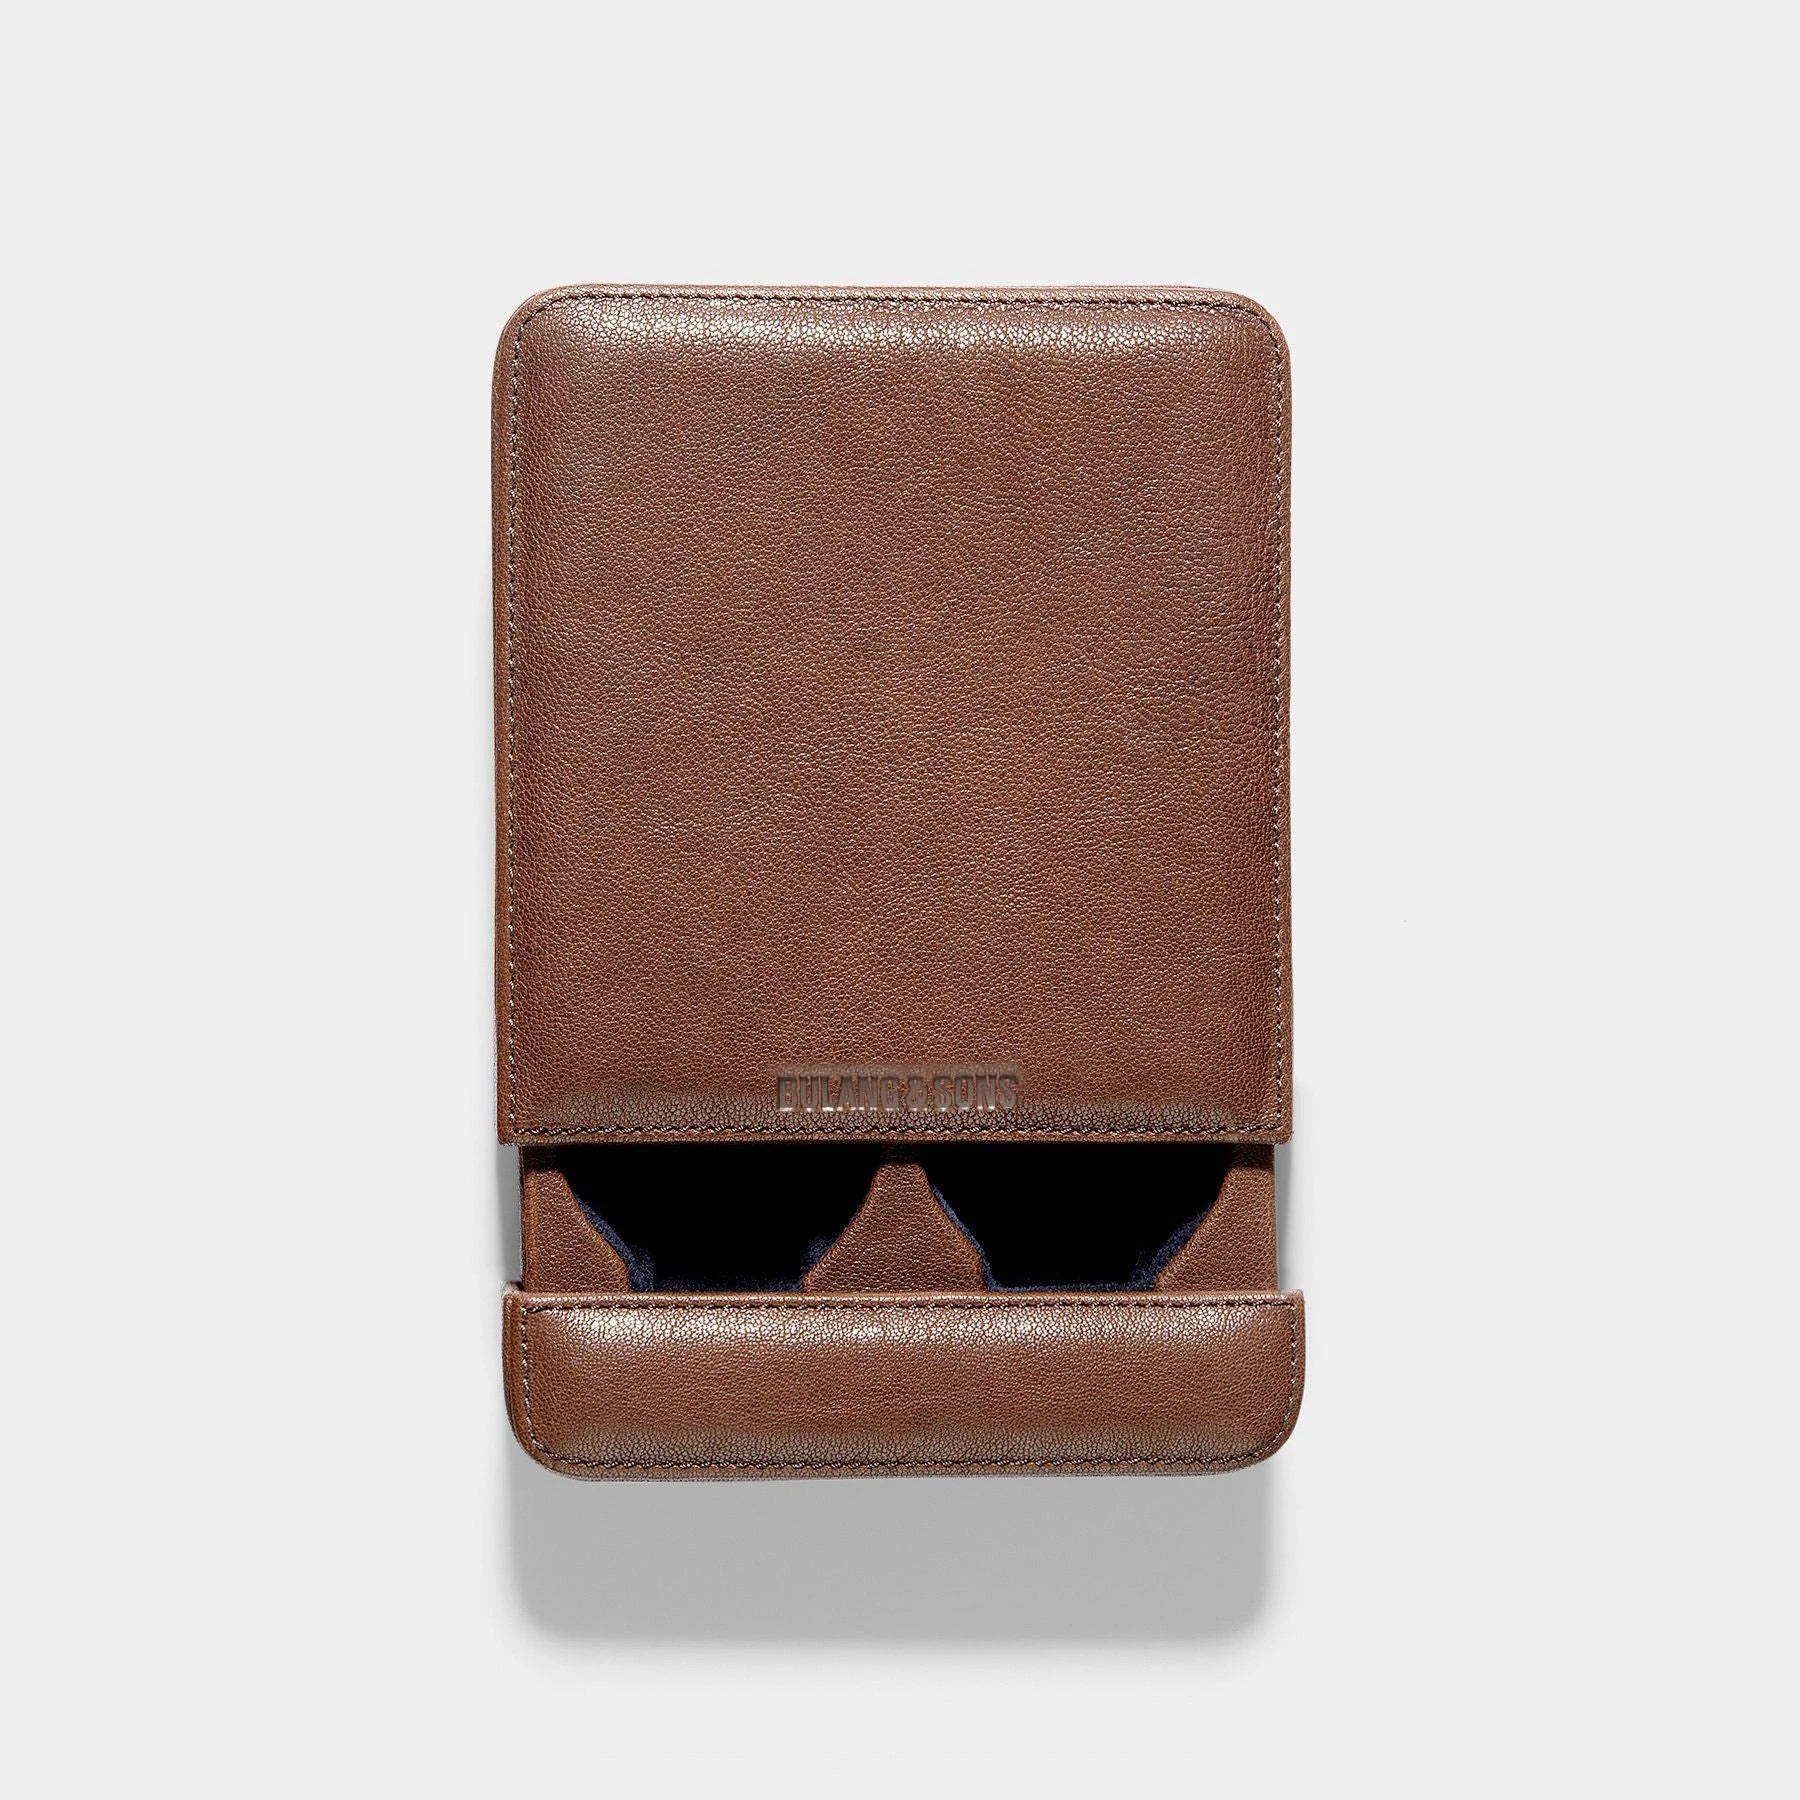 Washed Brown Leather 2 Watch Slider Box